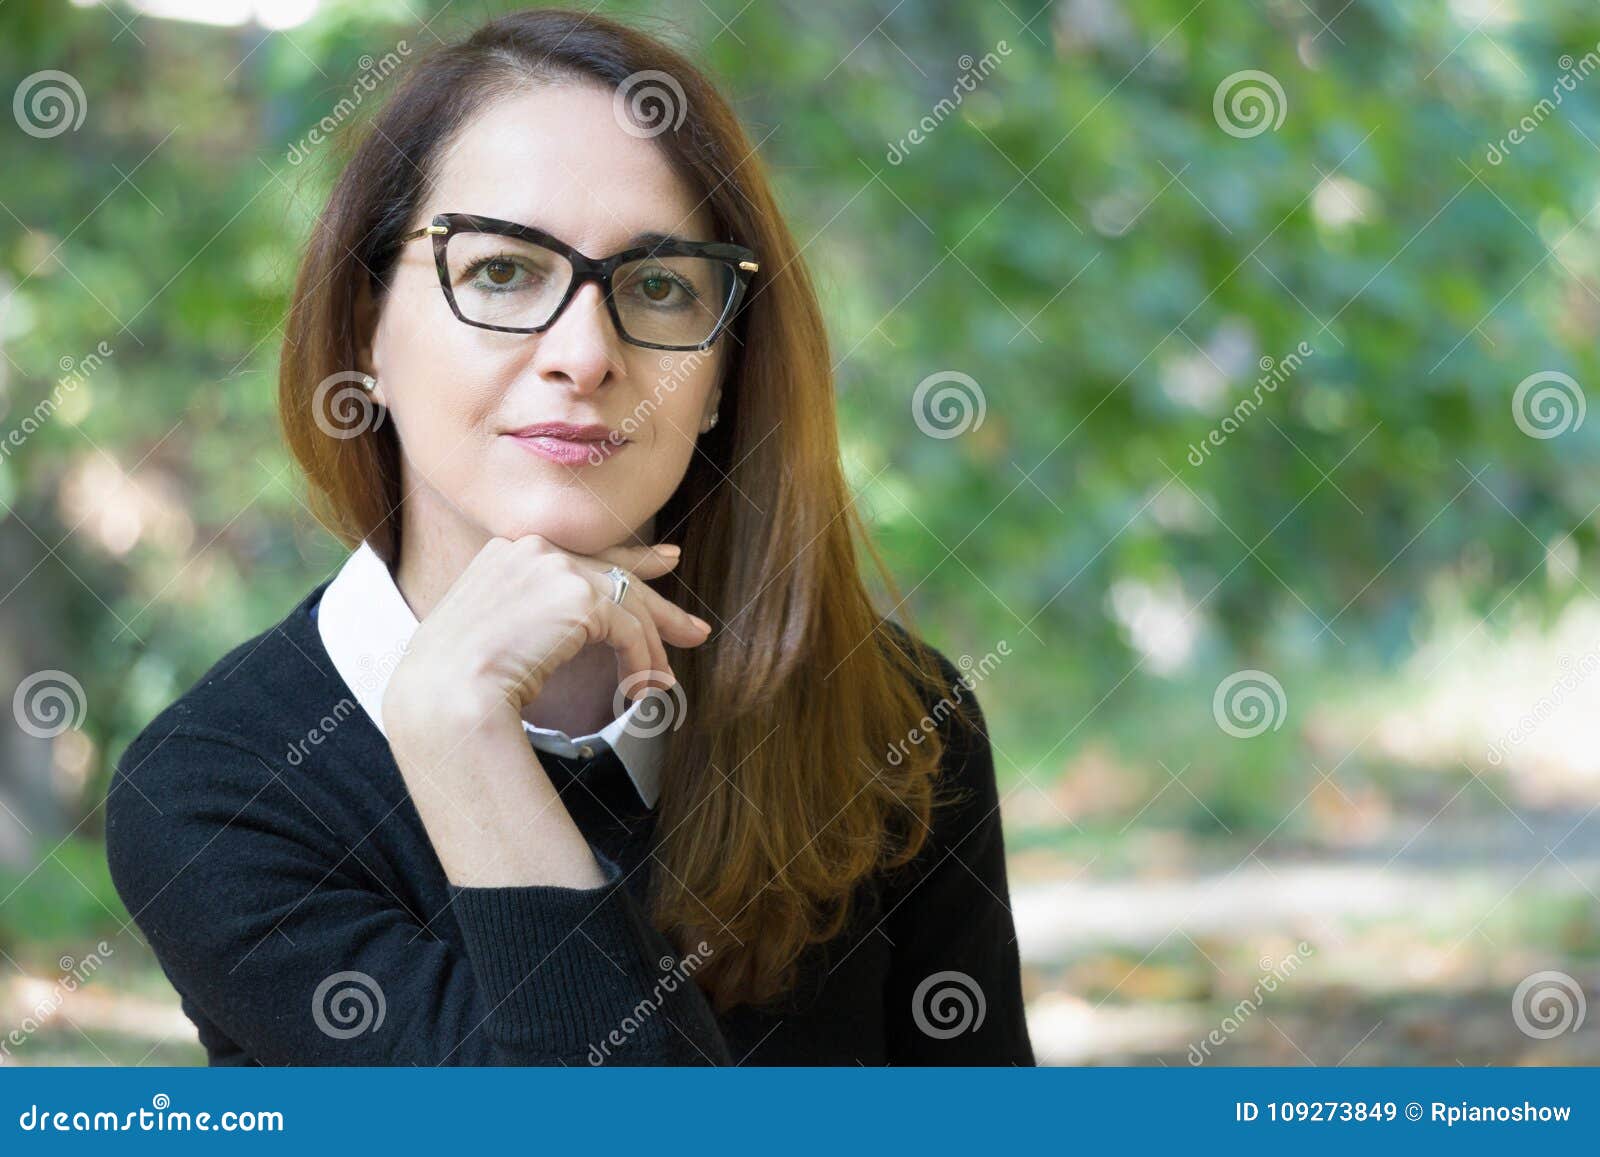 Portrait Of A Mature Woman Wearing Glasses Stock Image